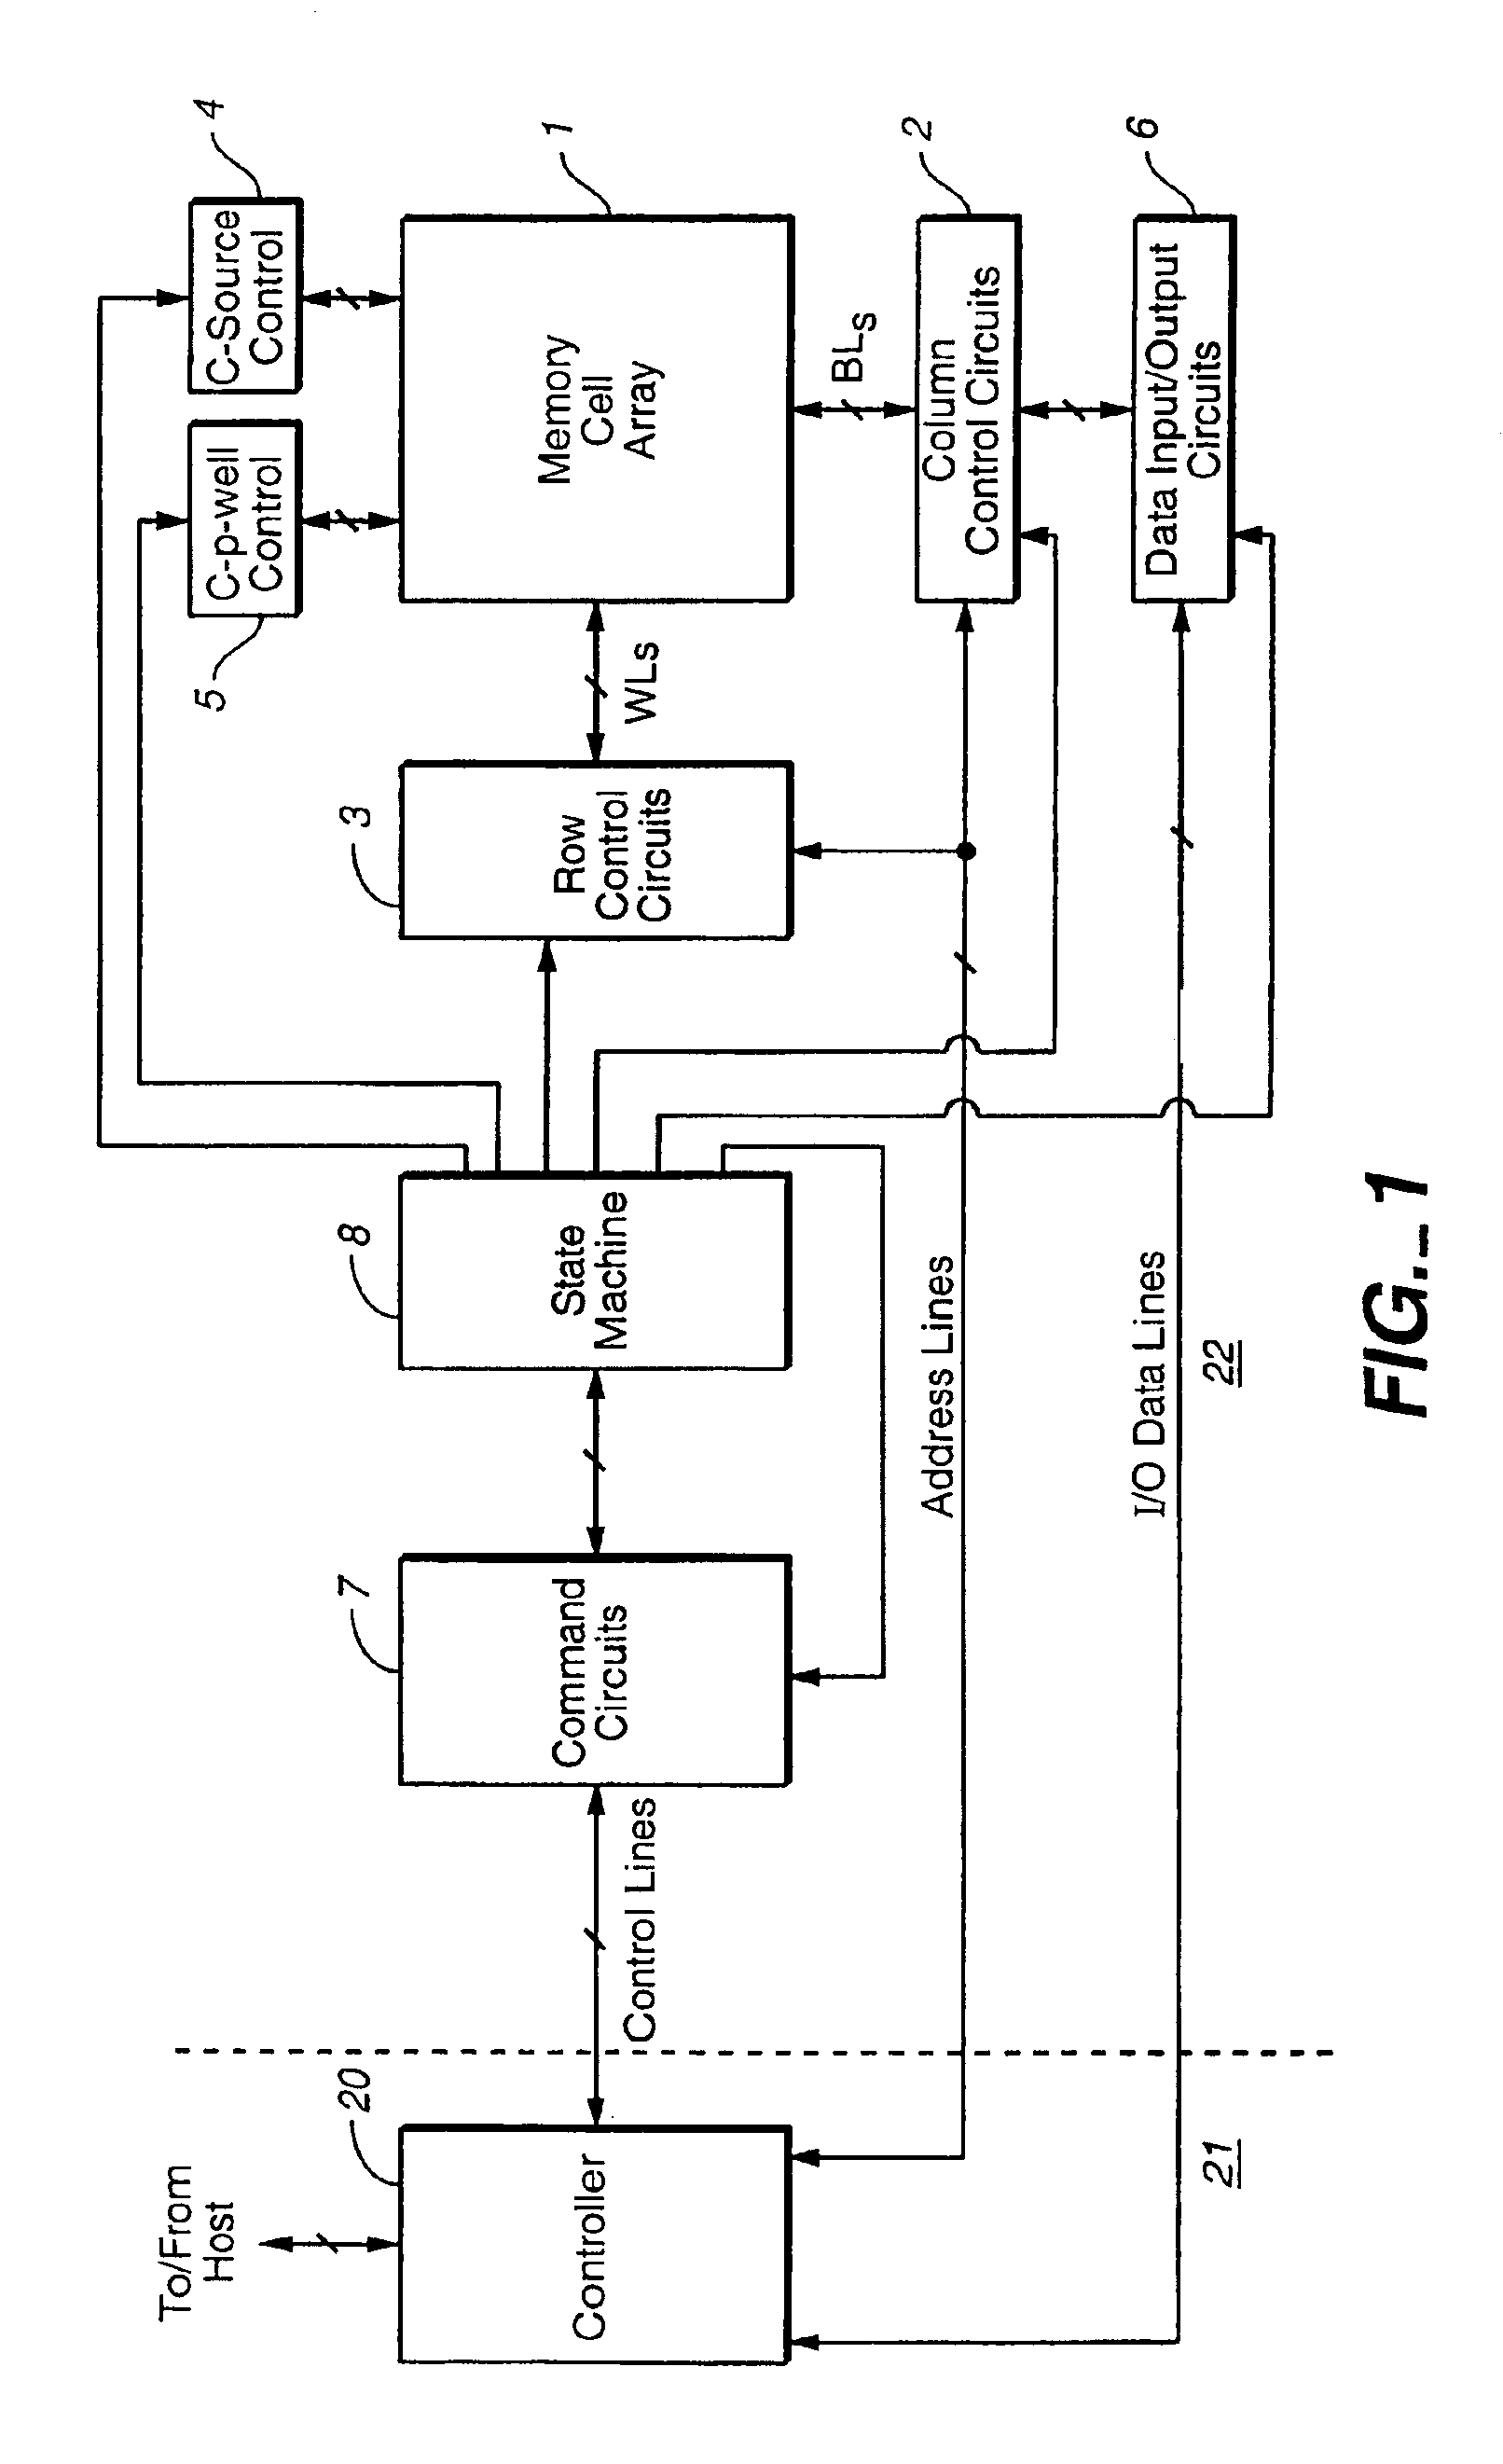 Selective operation of a multi-state non-volatile memory system in a binary mode